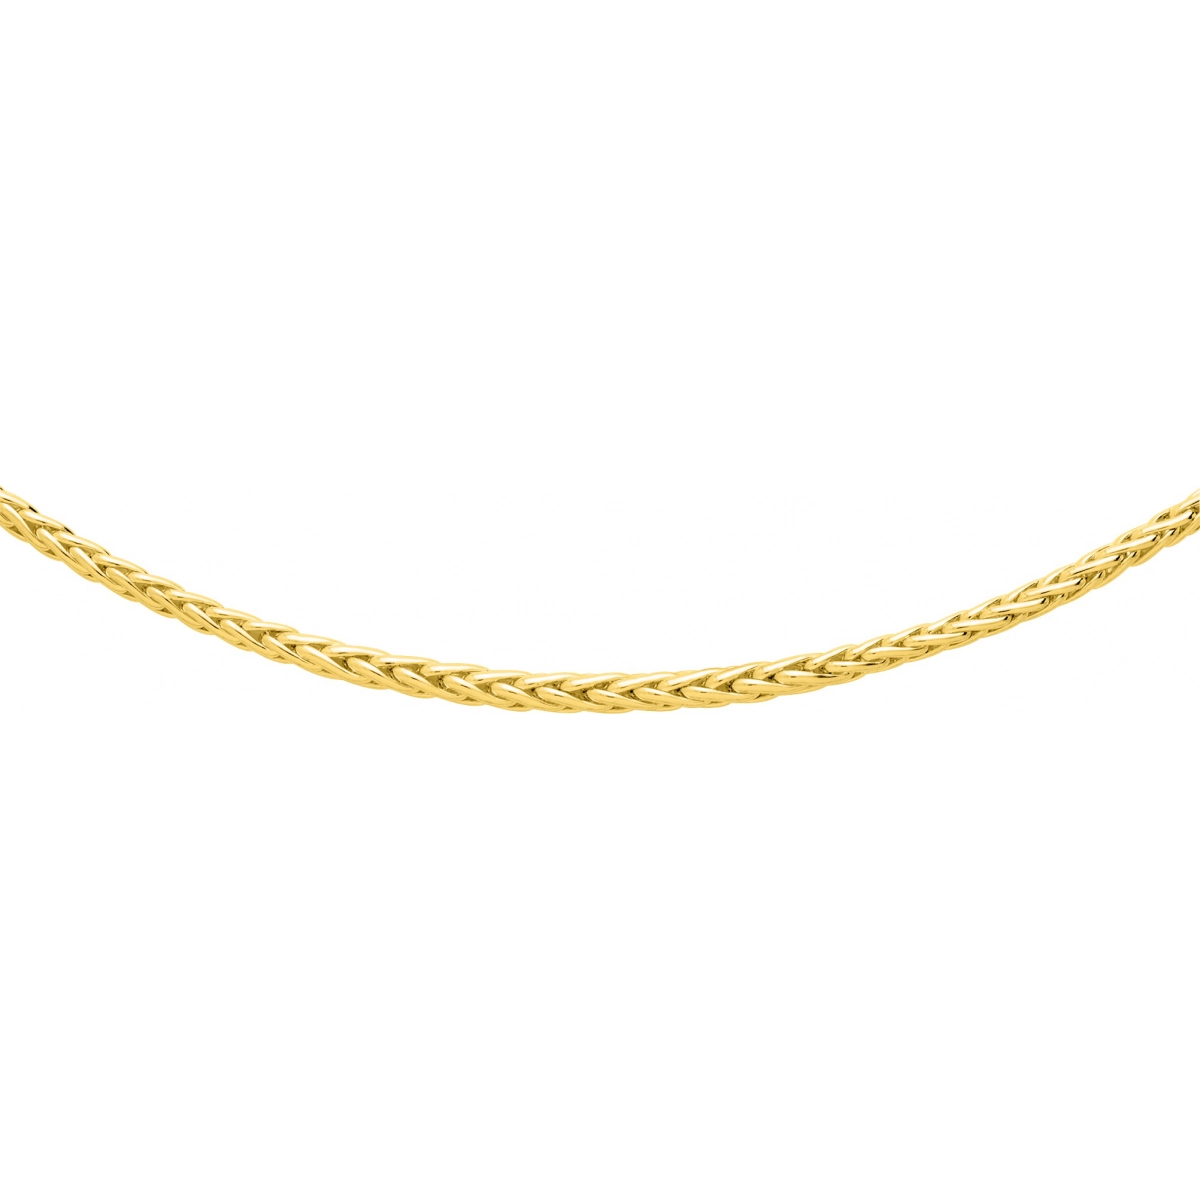 Necklace gold plated Brass - Size: 42  Lua Blanca  102011.42